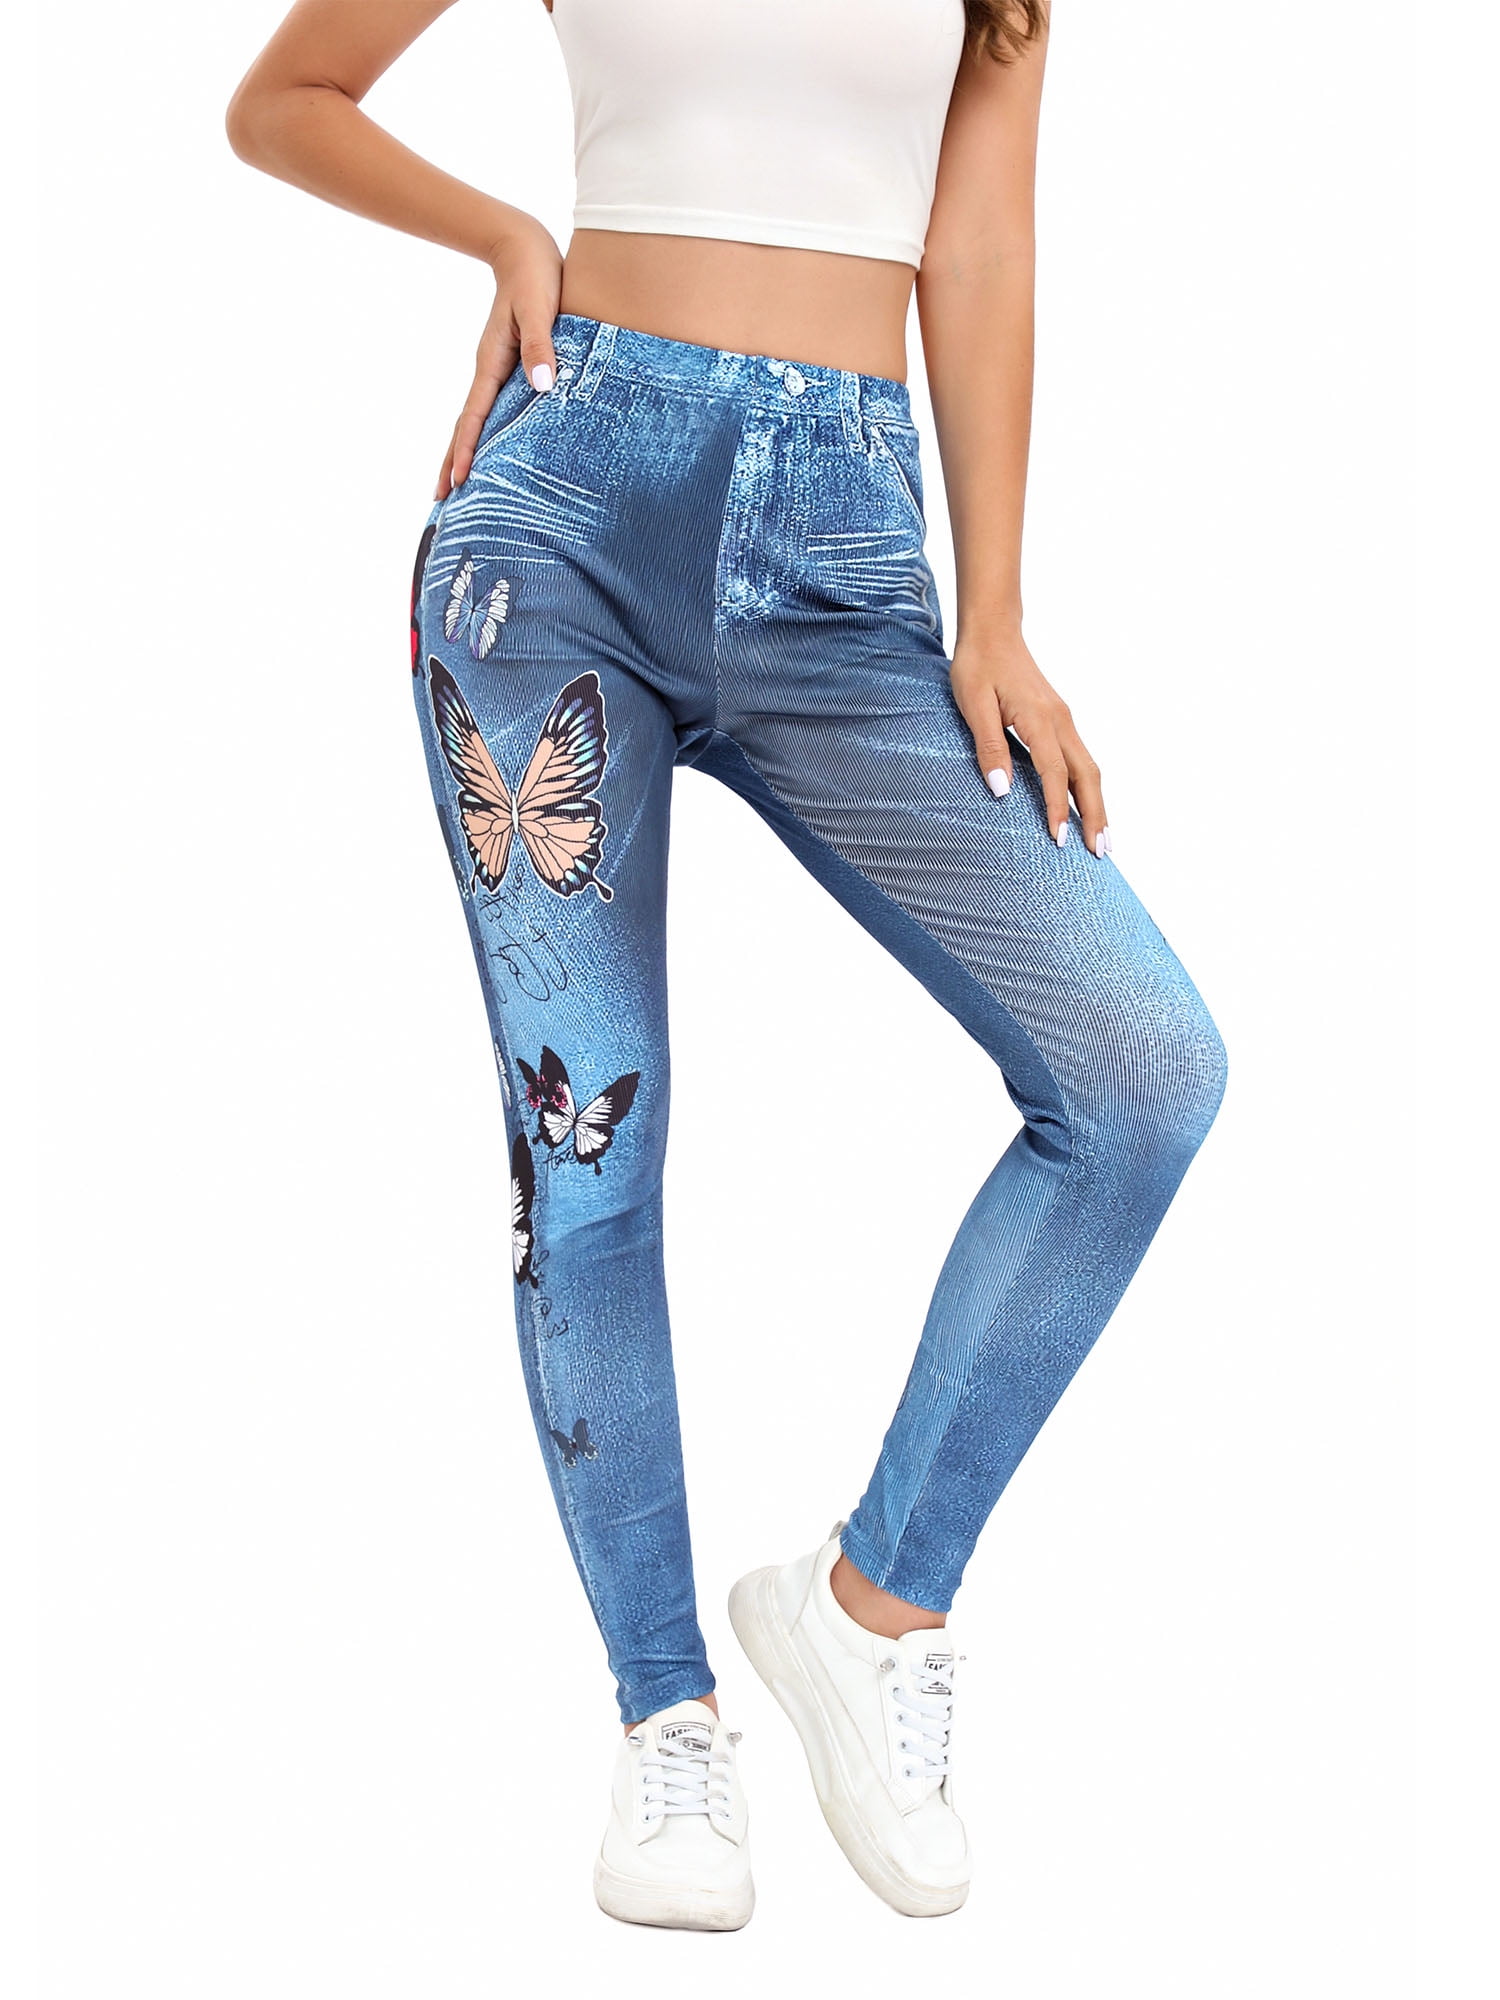 Frontwalk Jean Leggings for Women Printed Denim High Waisted Yoga Pants  Stretch Jean Look Jeggings Tights Blue-D S 